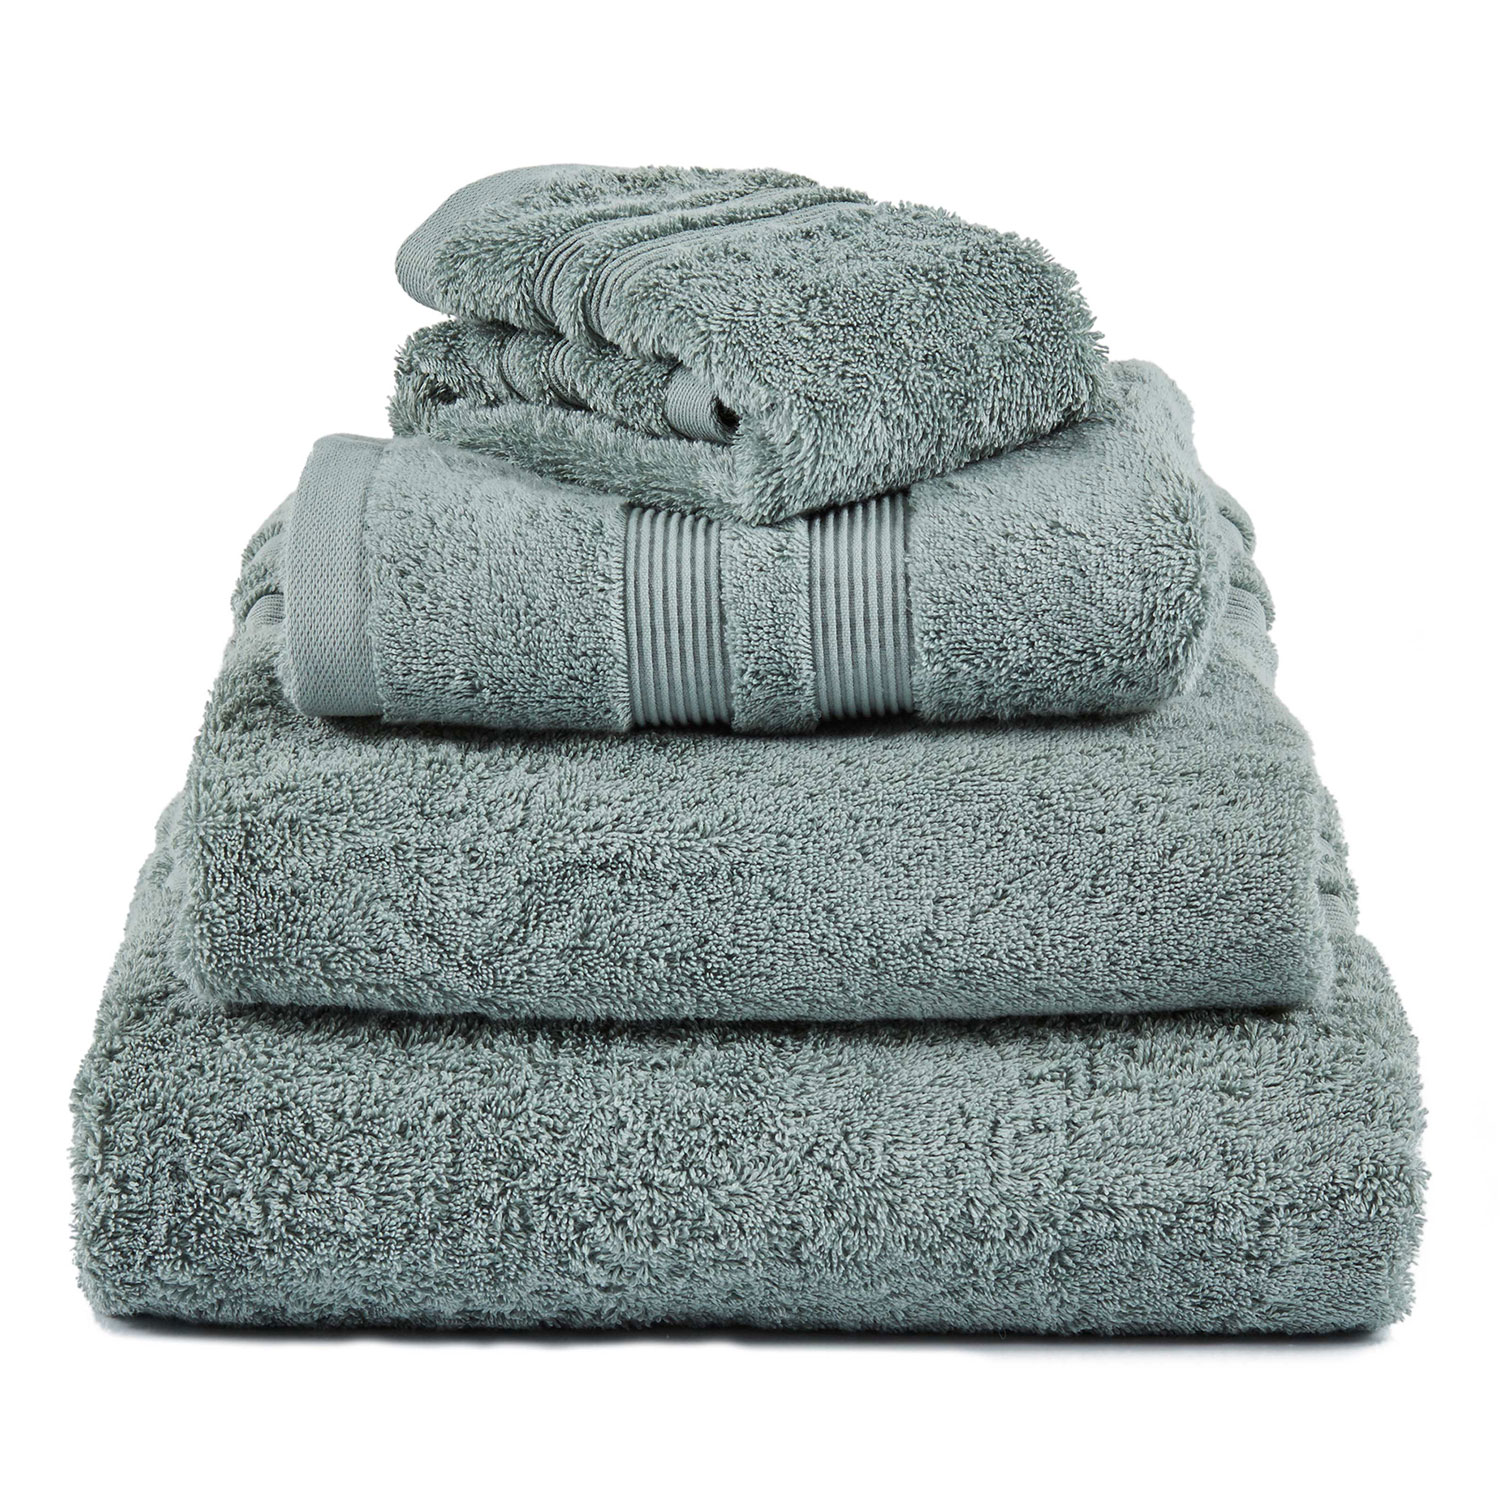 Hotel towels from Douxe, Essential Set, Silver gray